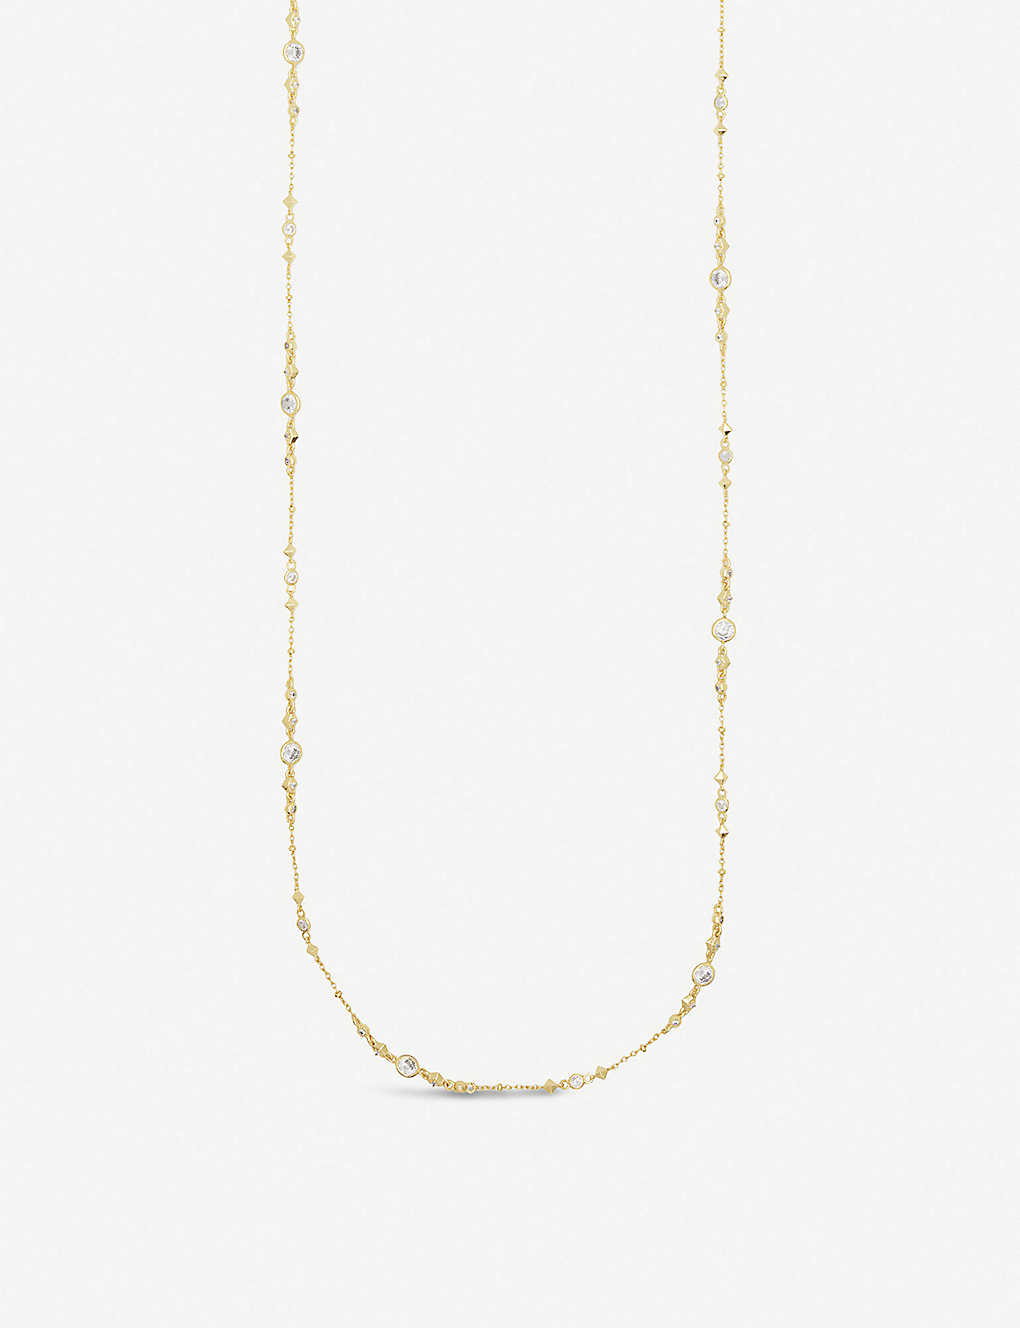 KENDRA SCOTT WYNDHAM 14CT GOLD-PLATED AND CUBIC ZIRCONIA NECKLACE,5276-10236-N1097421